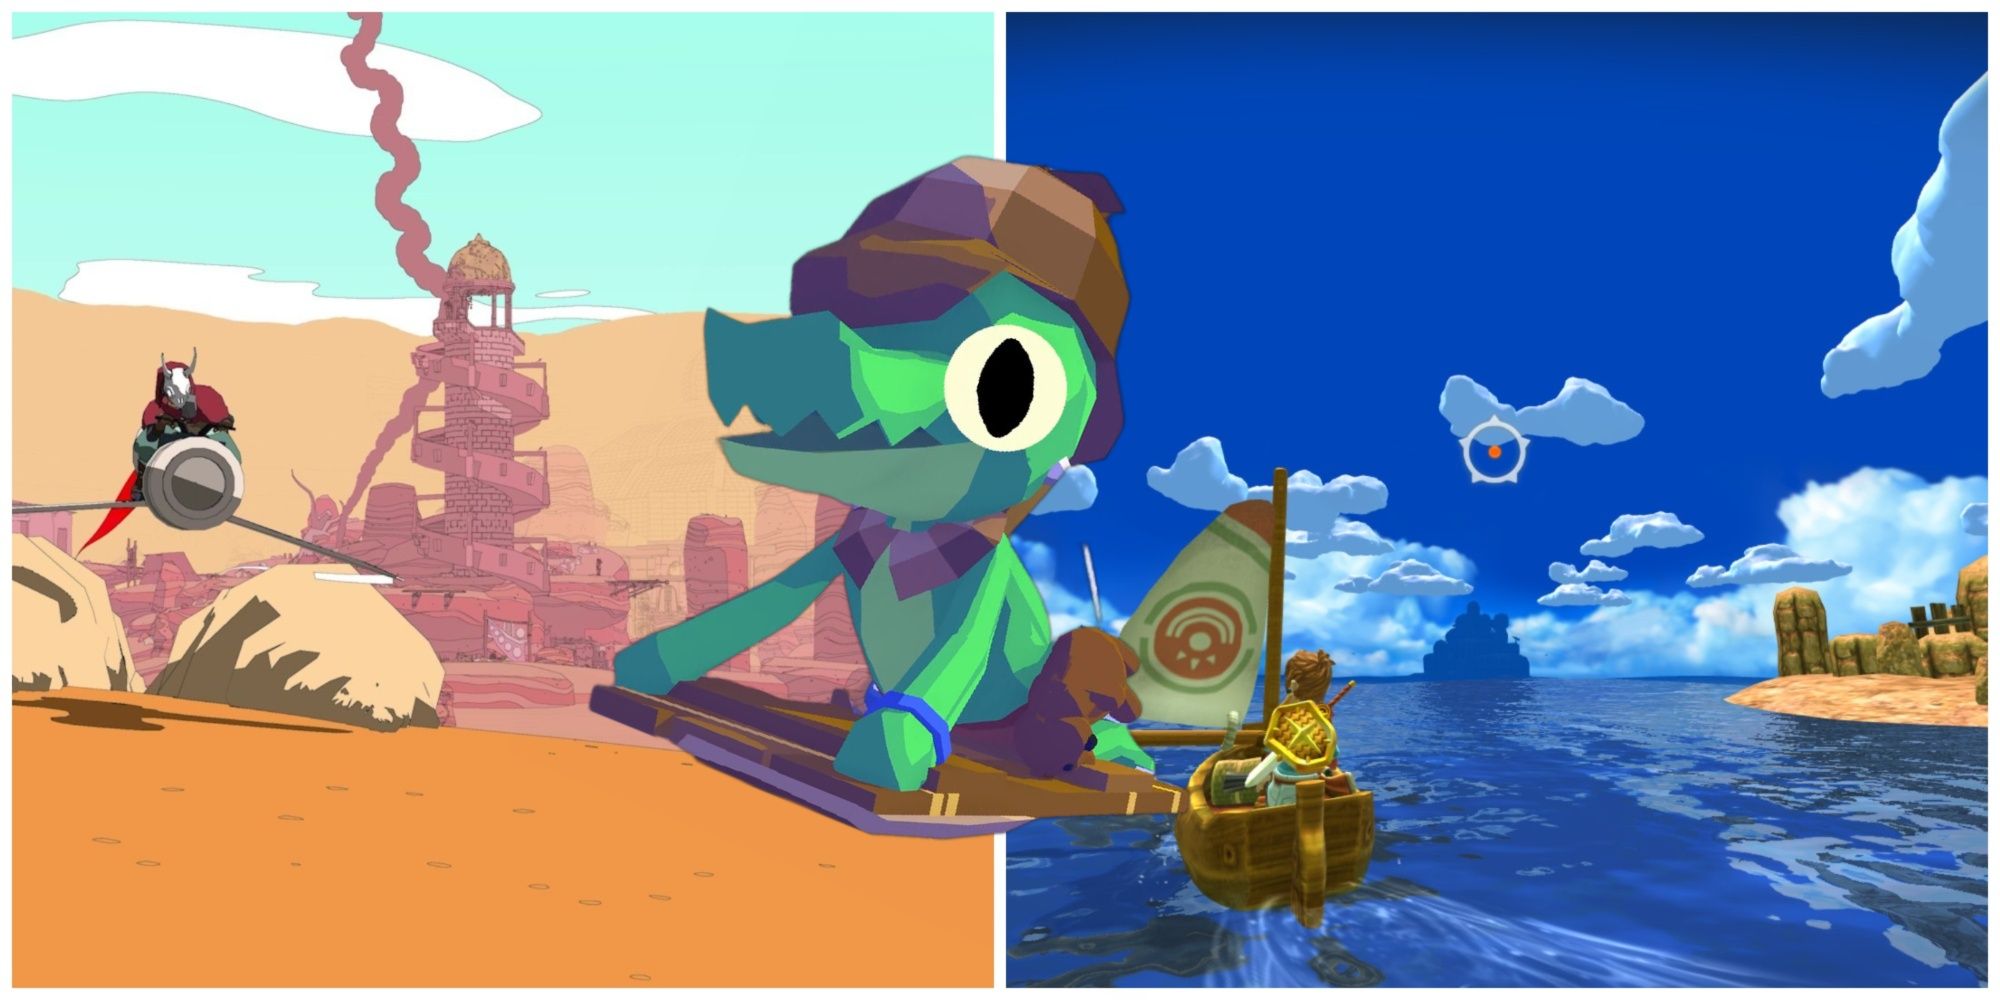 Games For Fans Of Wind Waker Featured Image - Sable, Oceanhorn, Lil Gator Game